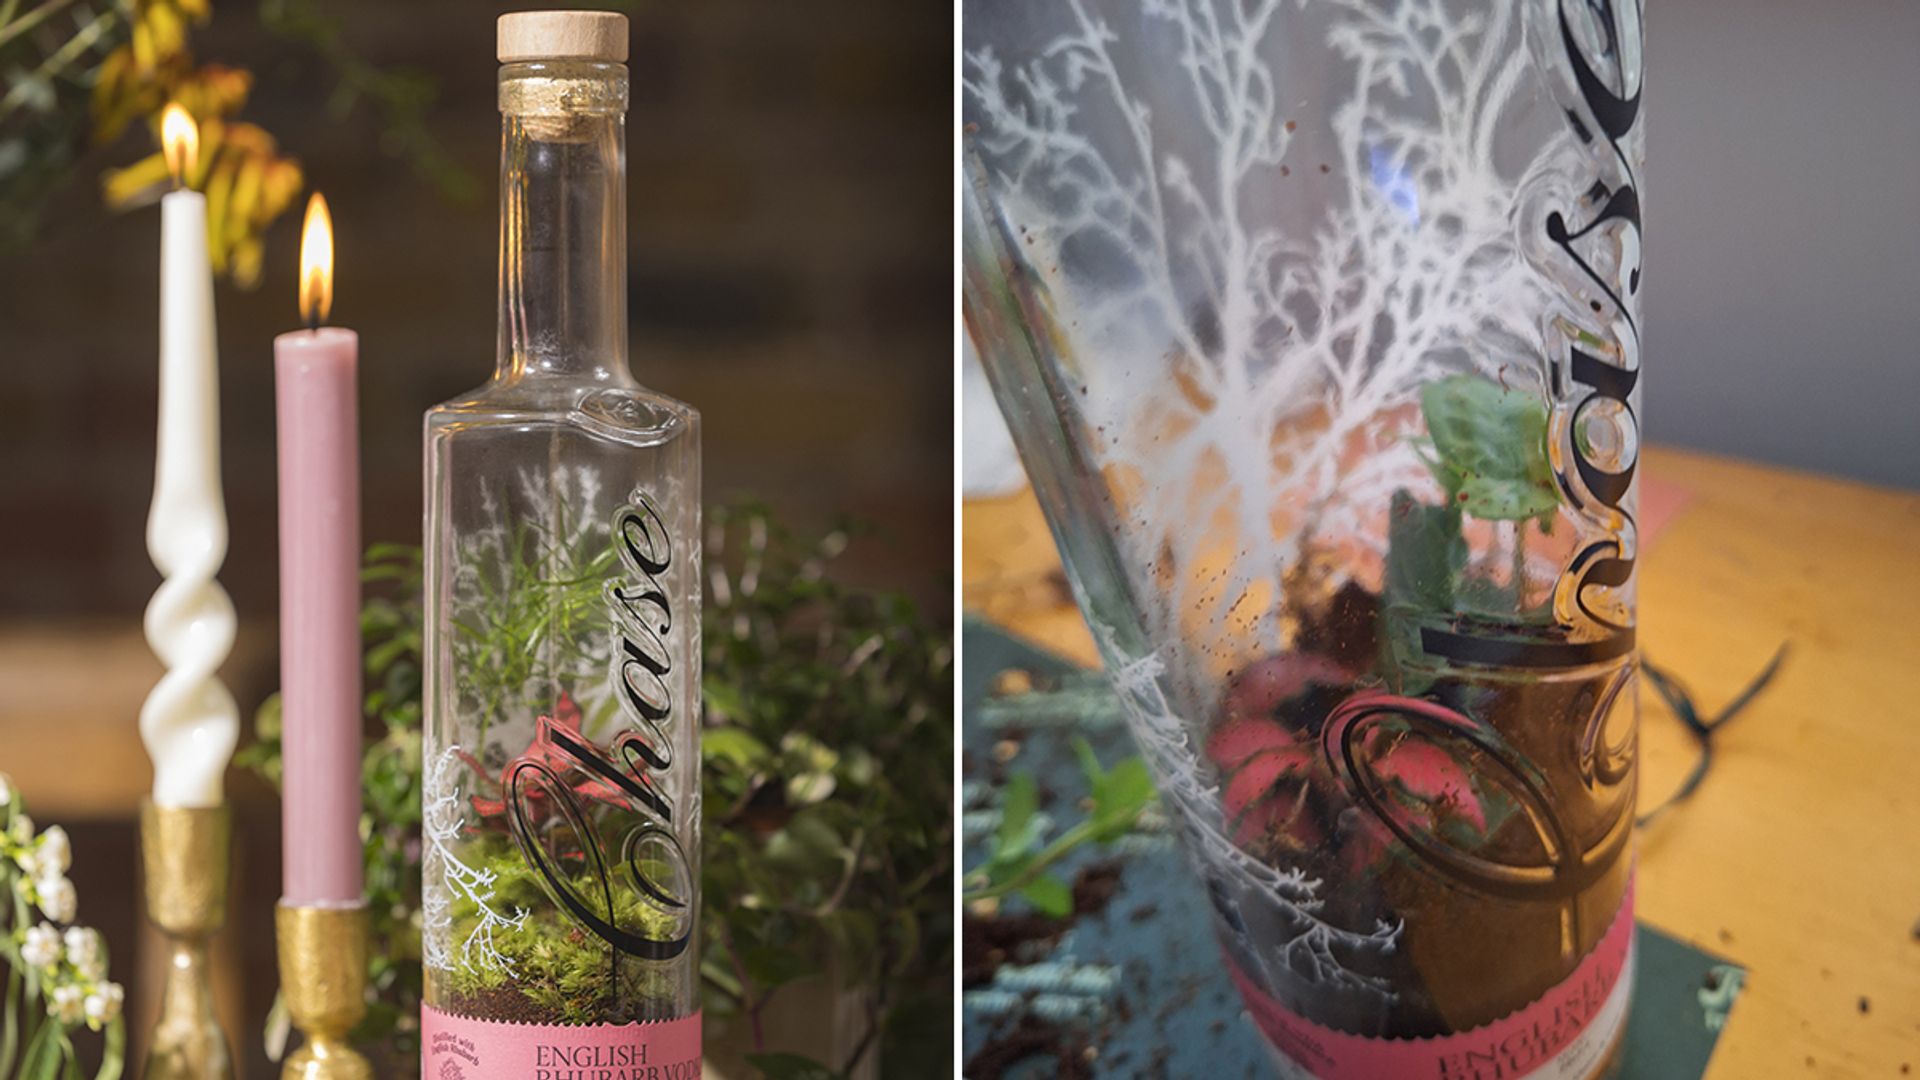 A side-by-side image of professional terrarium and journalist's attempt at one